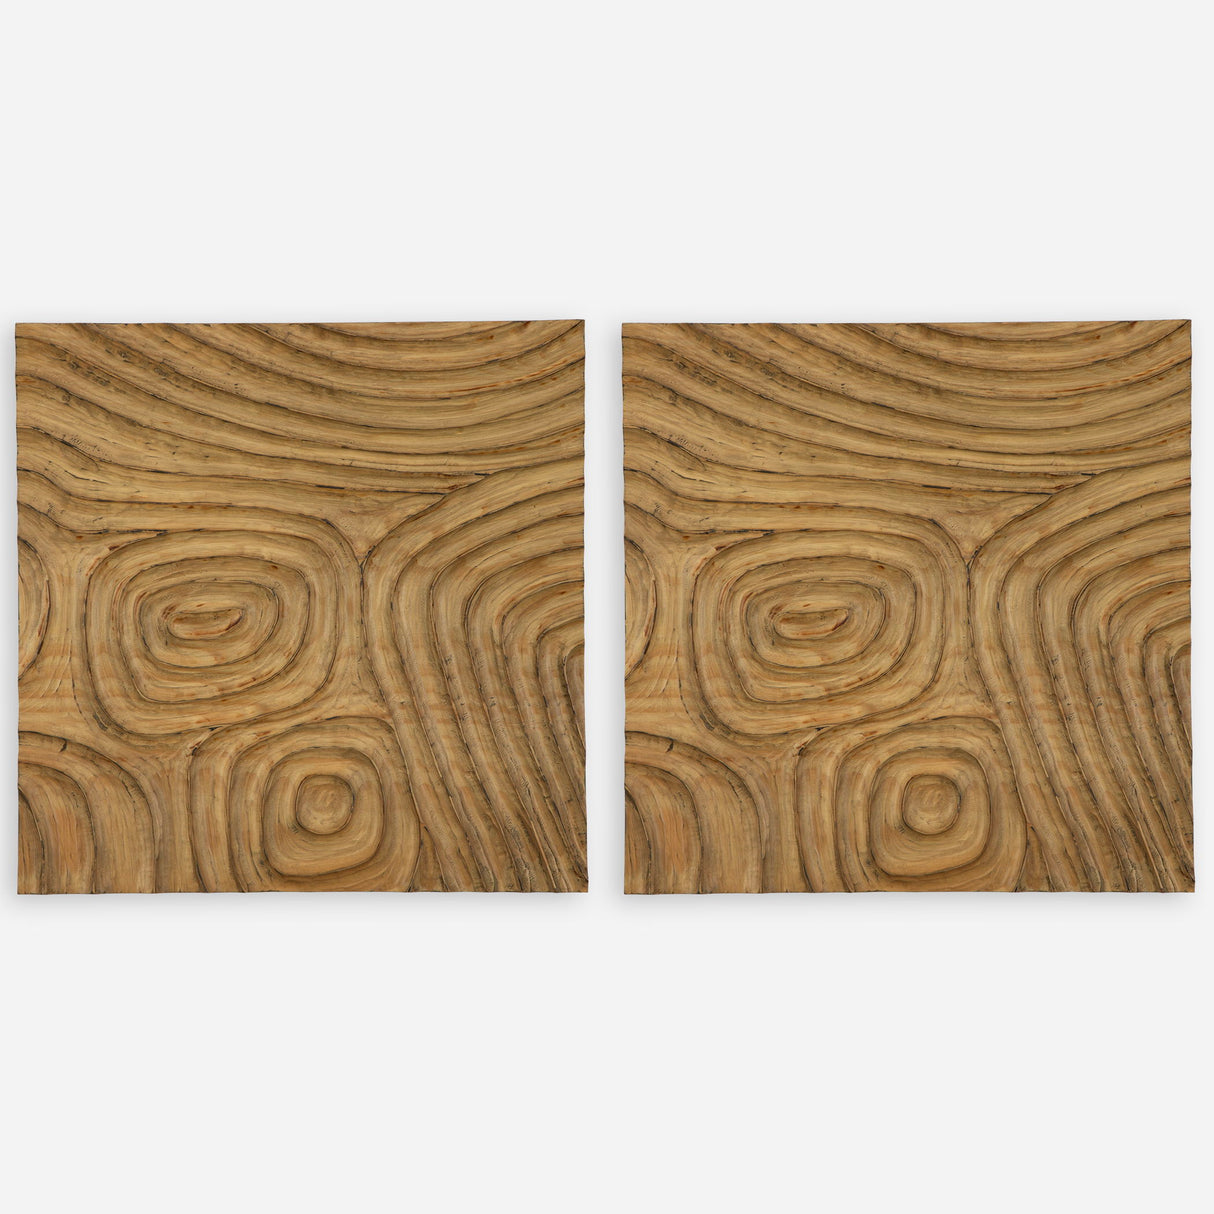 Channels - Wood Wall Decor - Light Brown